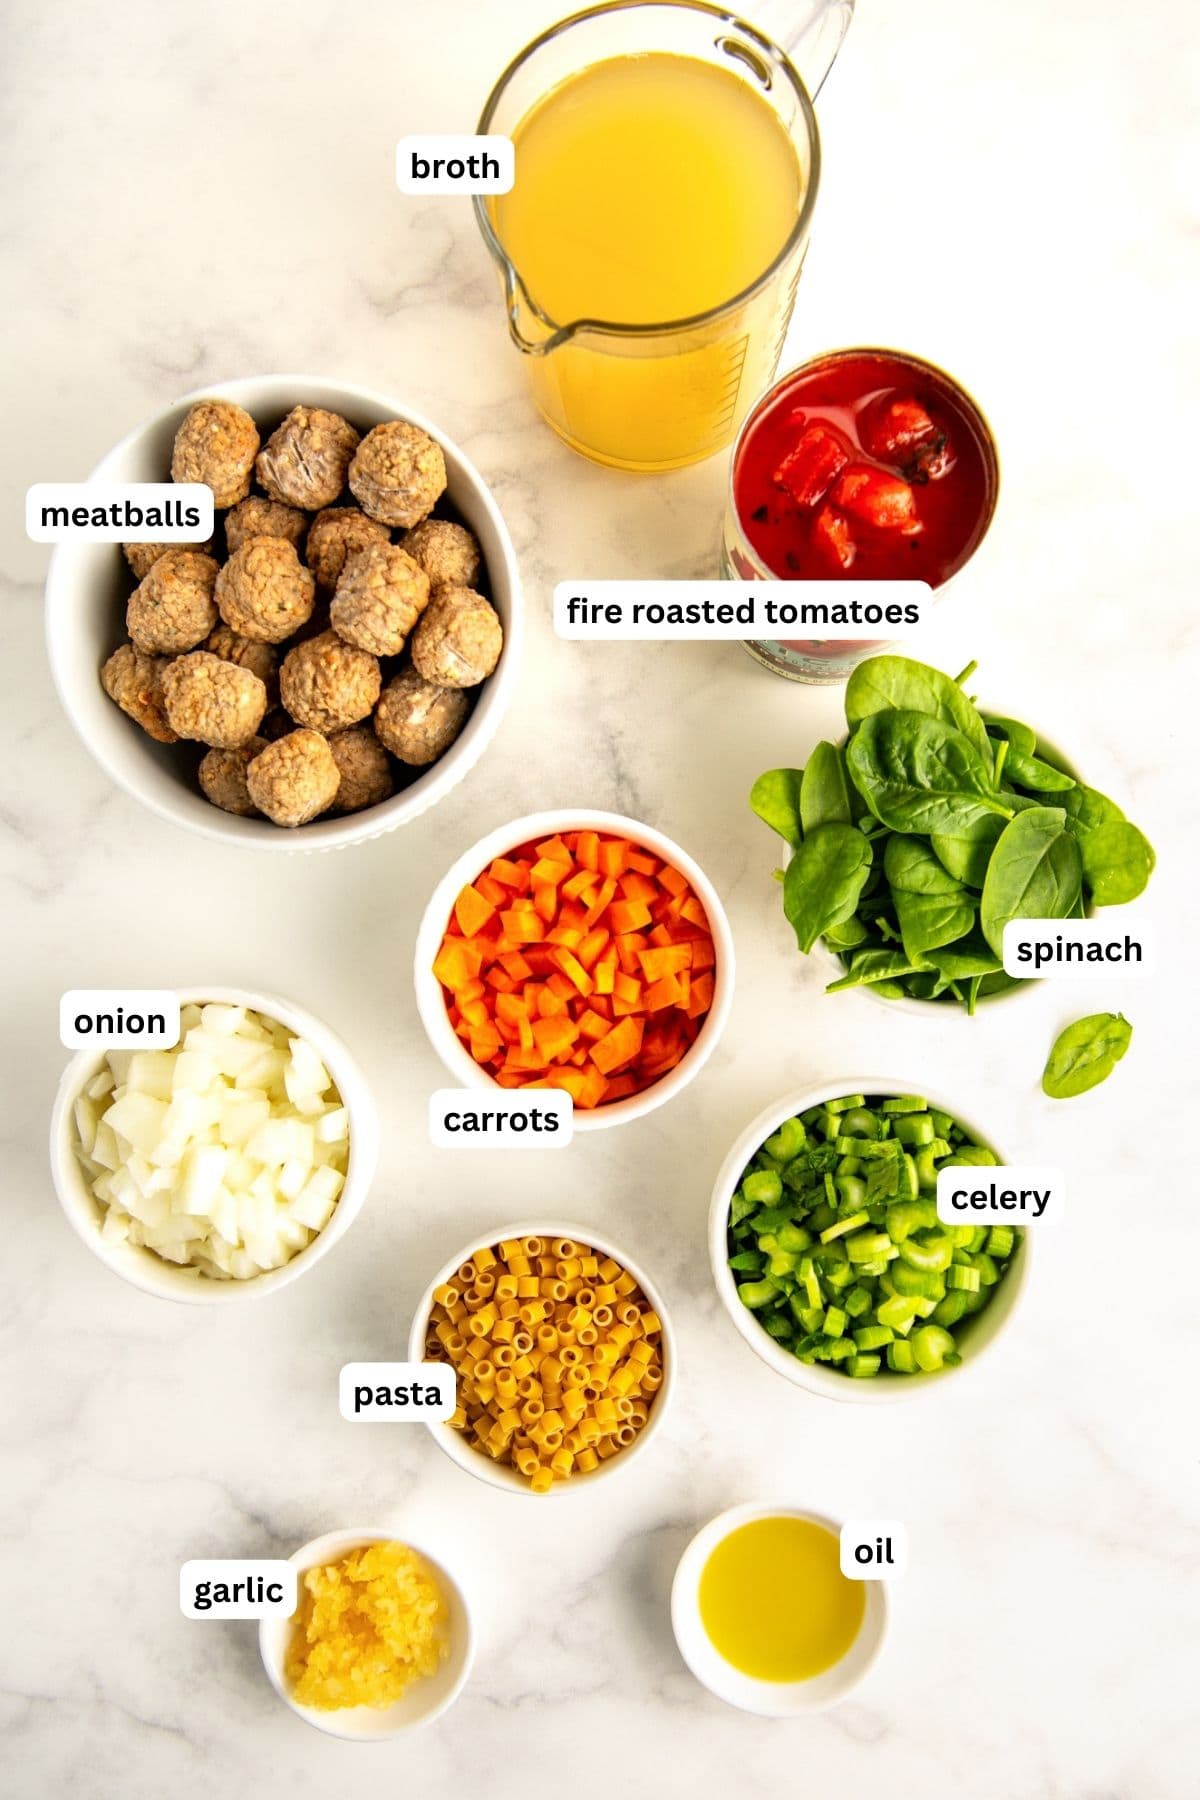 Ingredients for Italian wedding soup recipe arranged in bowls, from top to bottom: broth, meatballs, fire roasted tomatoes, spinach, onion, carrots, celery, pasta, garlic and oil.